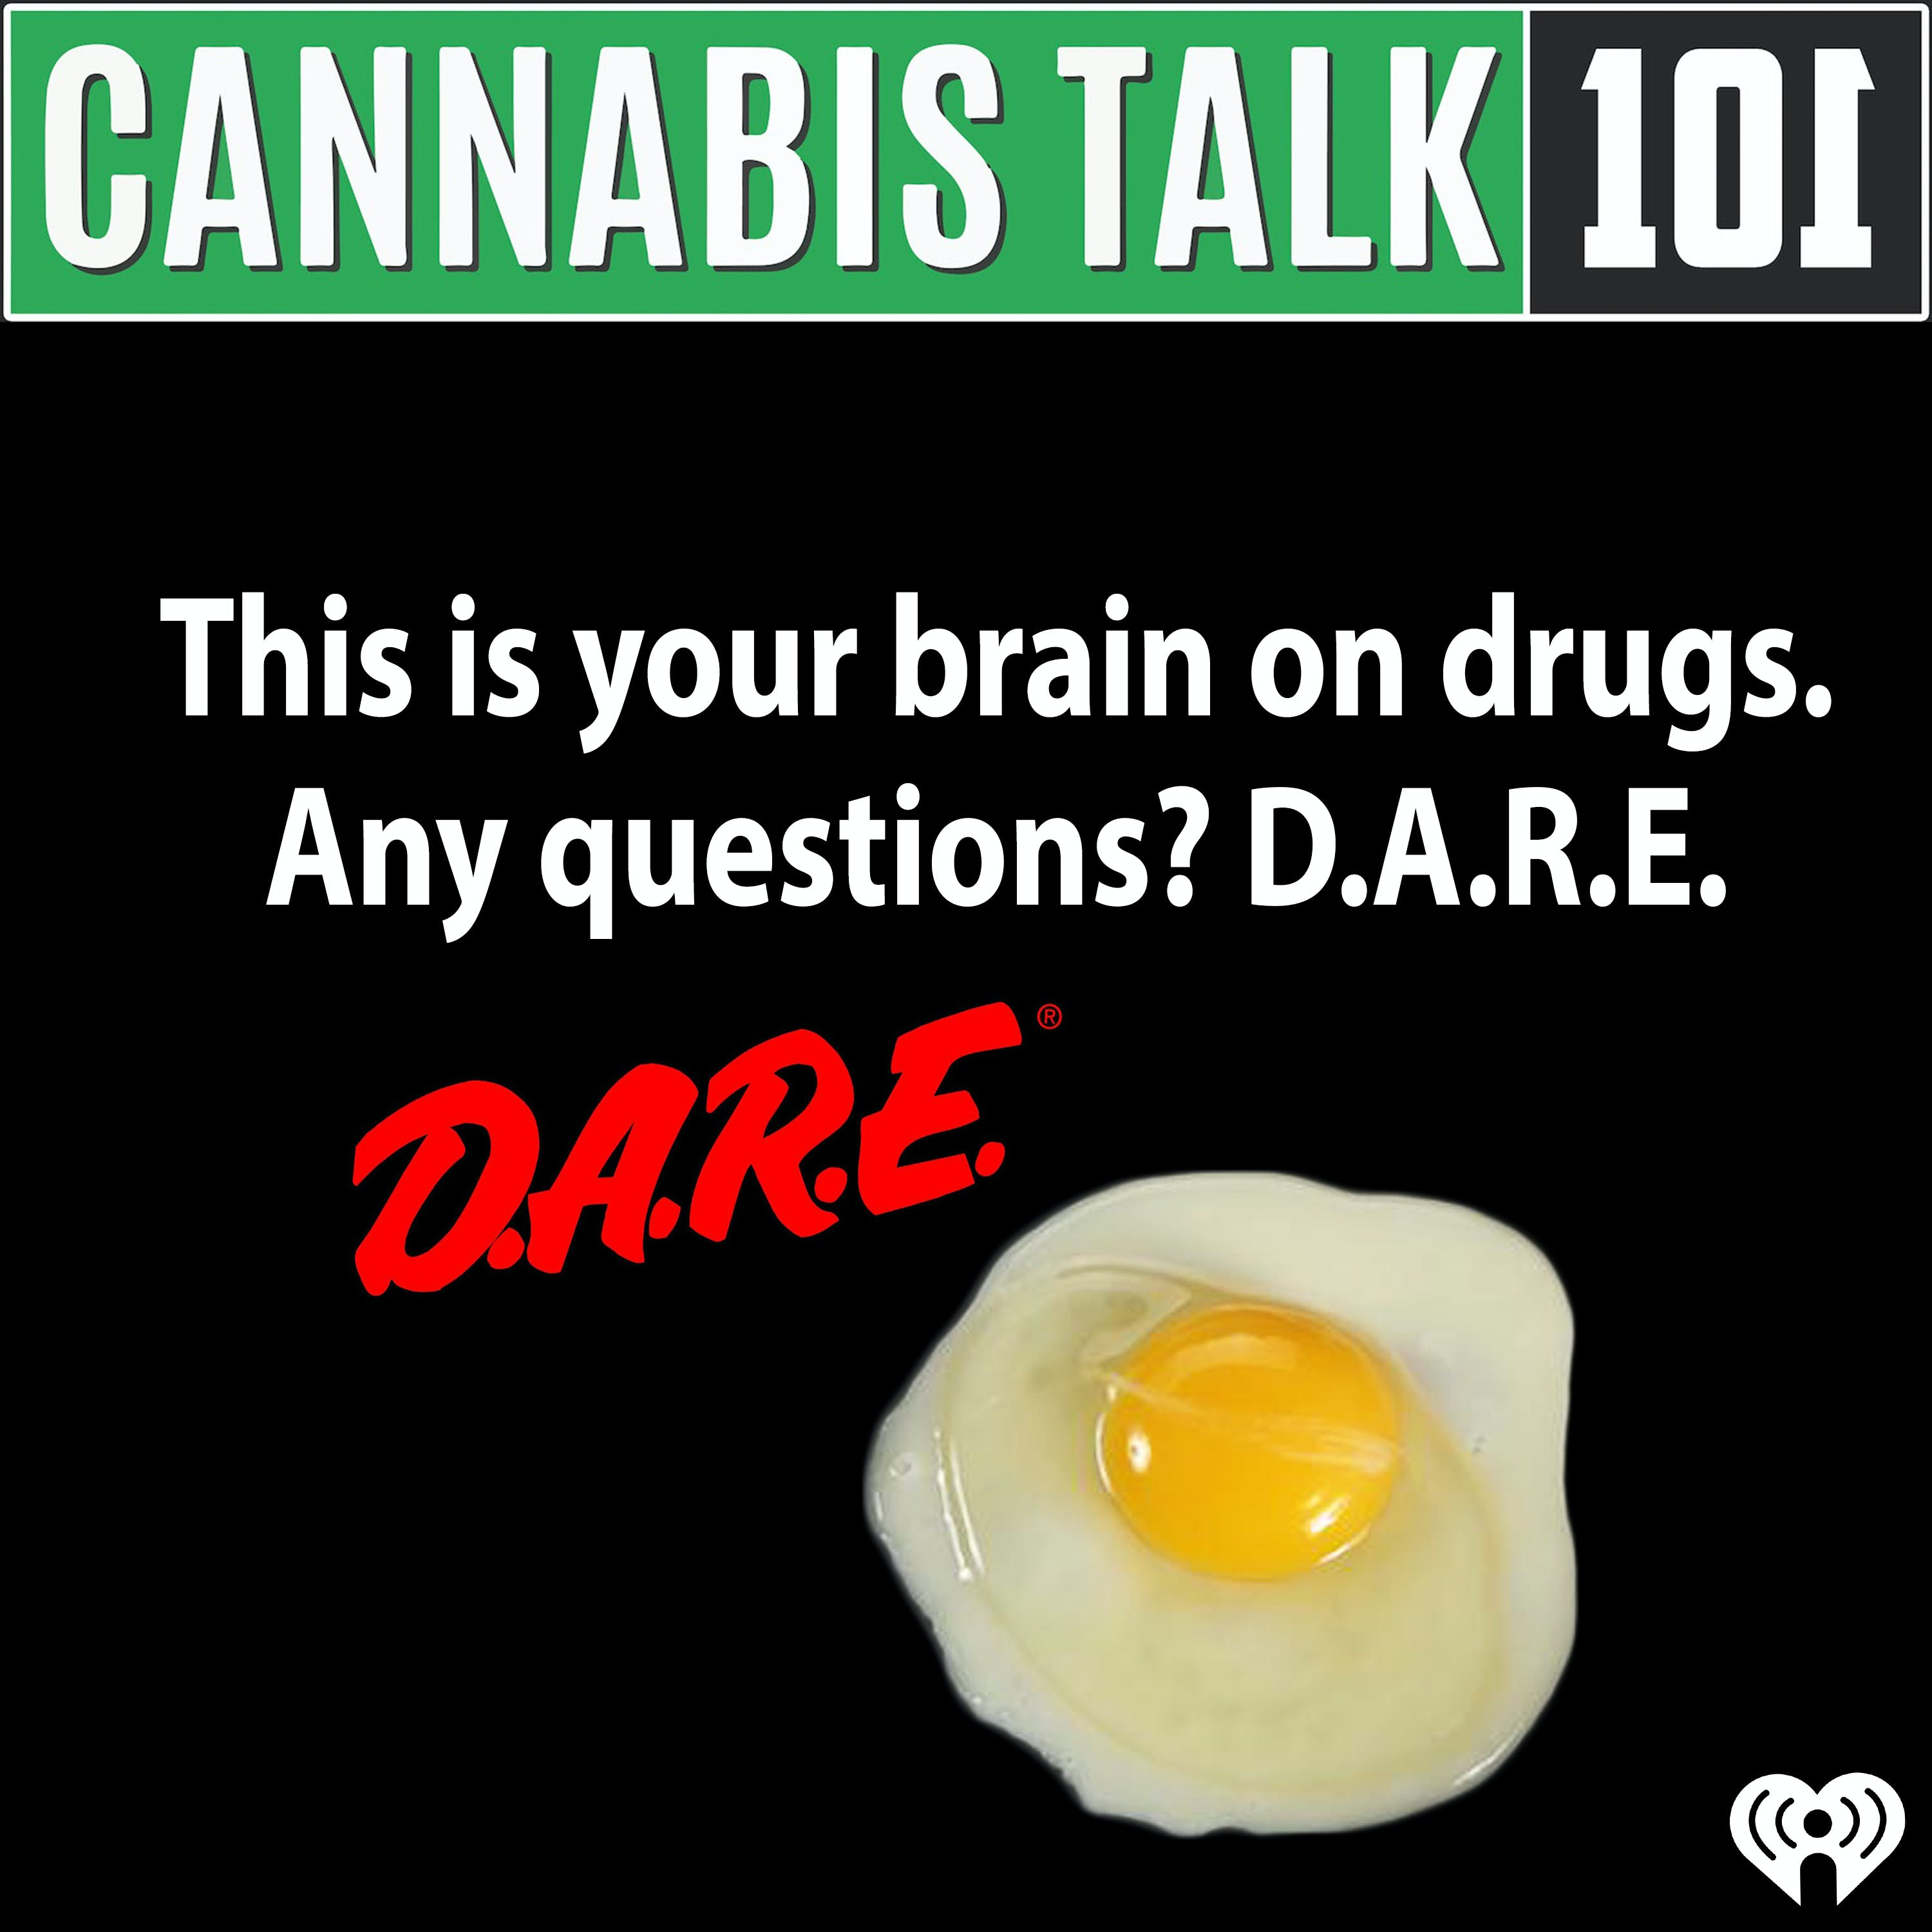 This is your brain on drugs, any questions? D.A.R.E